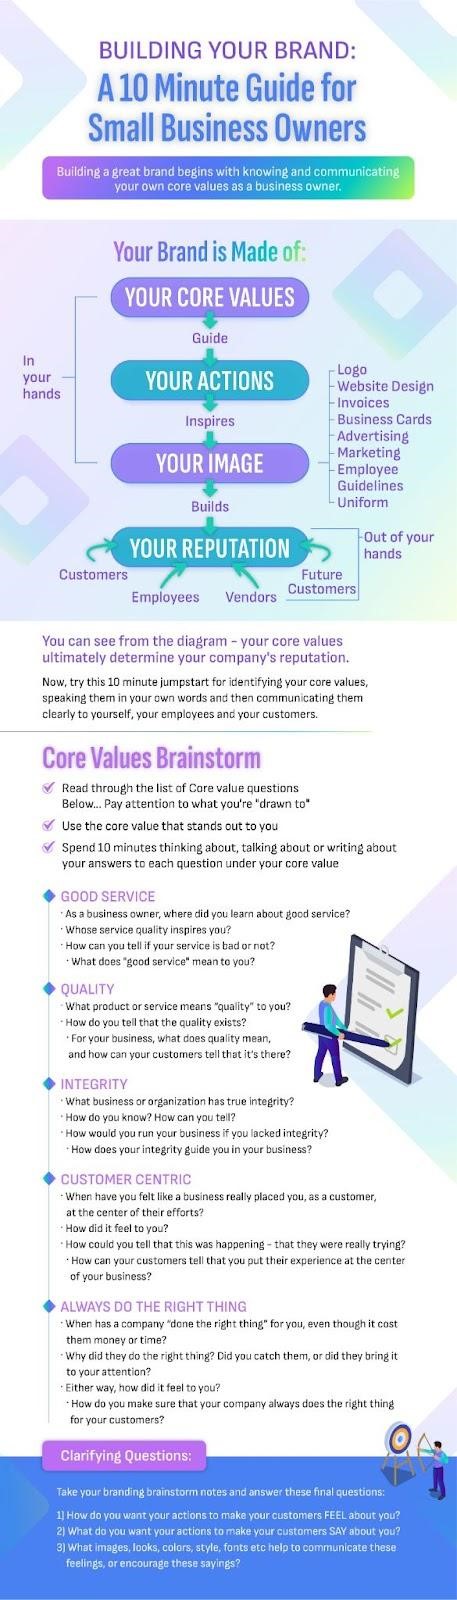 Building Your Brand Infographic